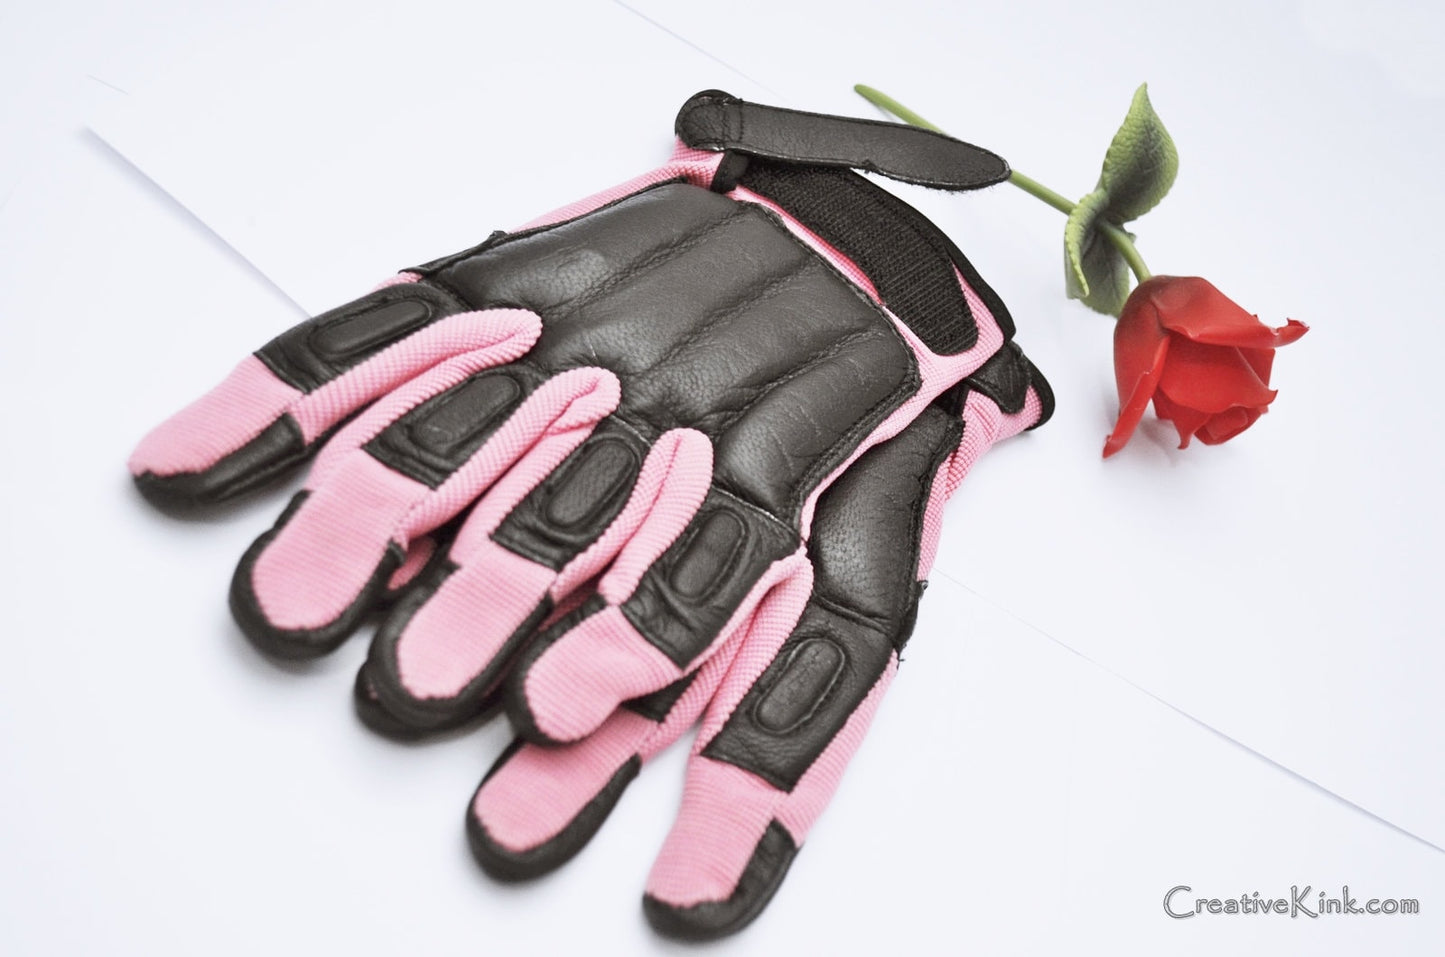 Weighted Spanking Gloves - Lead Weighted Gloves for Corporal BDSM Play